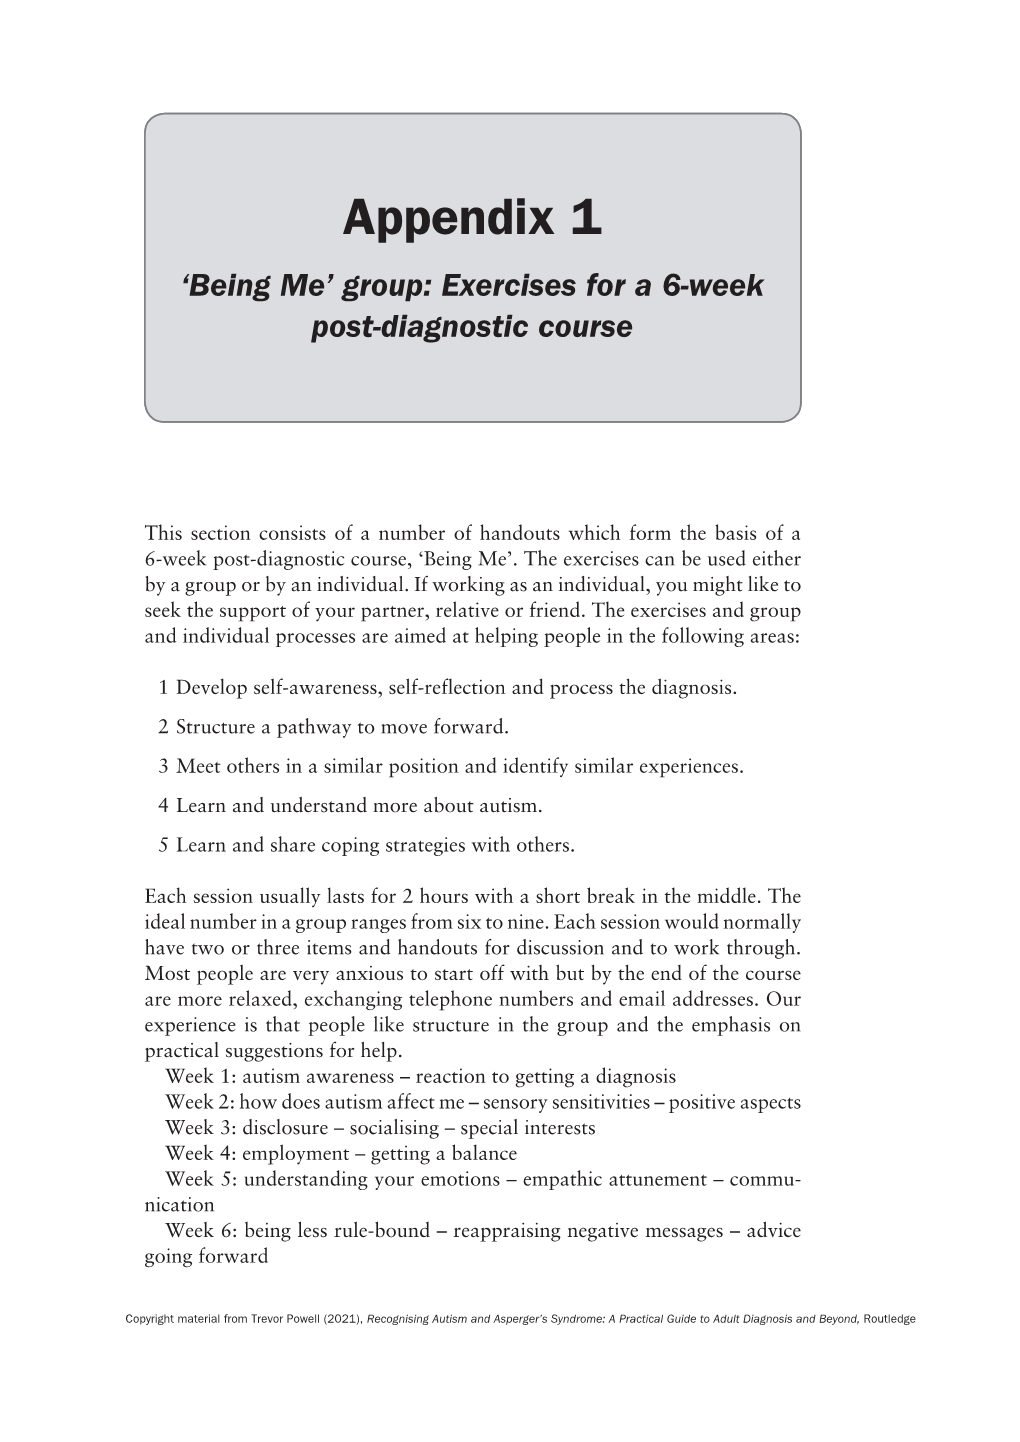 Appendix 1 ‘Being Me’ Group: Exercises for a 6-Week Post-Diagnostic Course